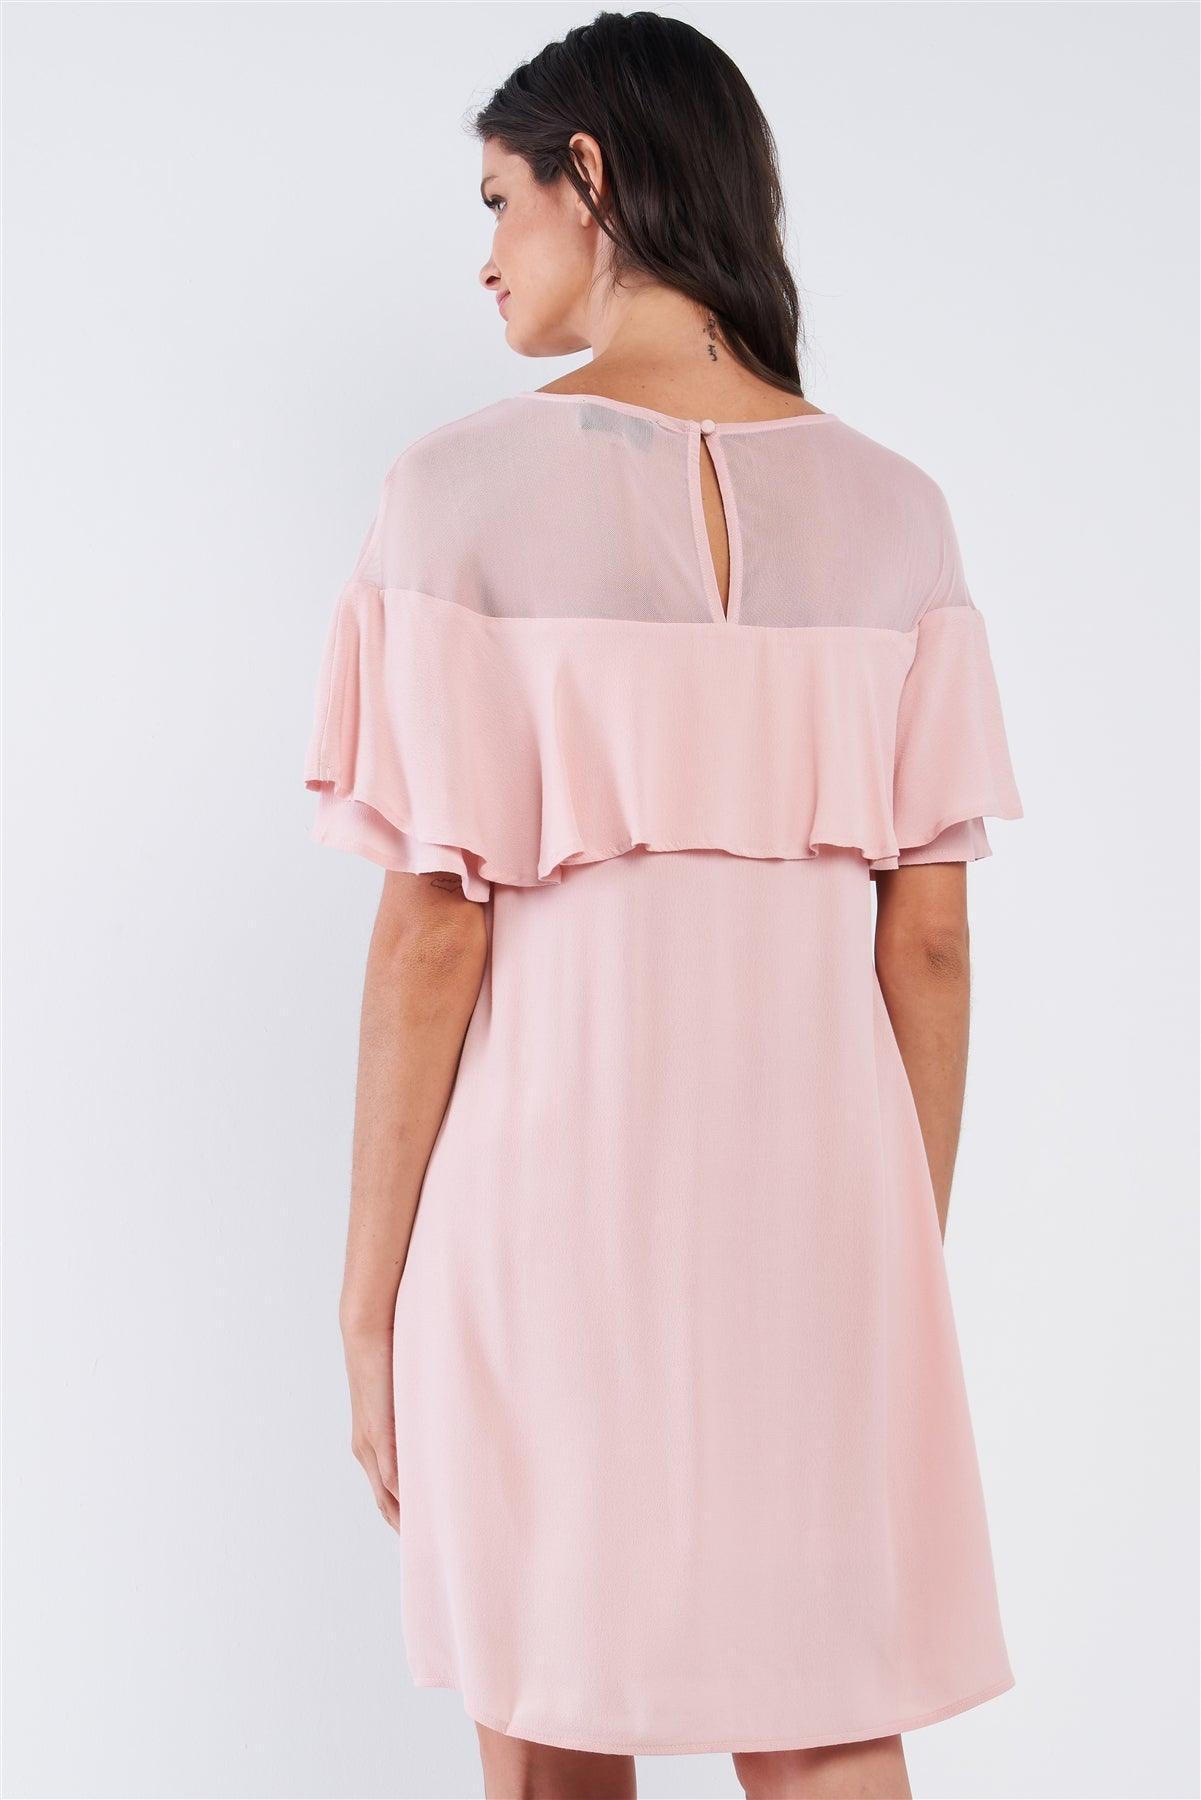 Dusty Pink Loose Fit Chest Lace Mesh Detail Ruffle Off-The-Shoulder Hem Mini Dress /1-2-2-1